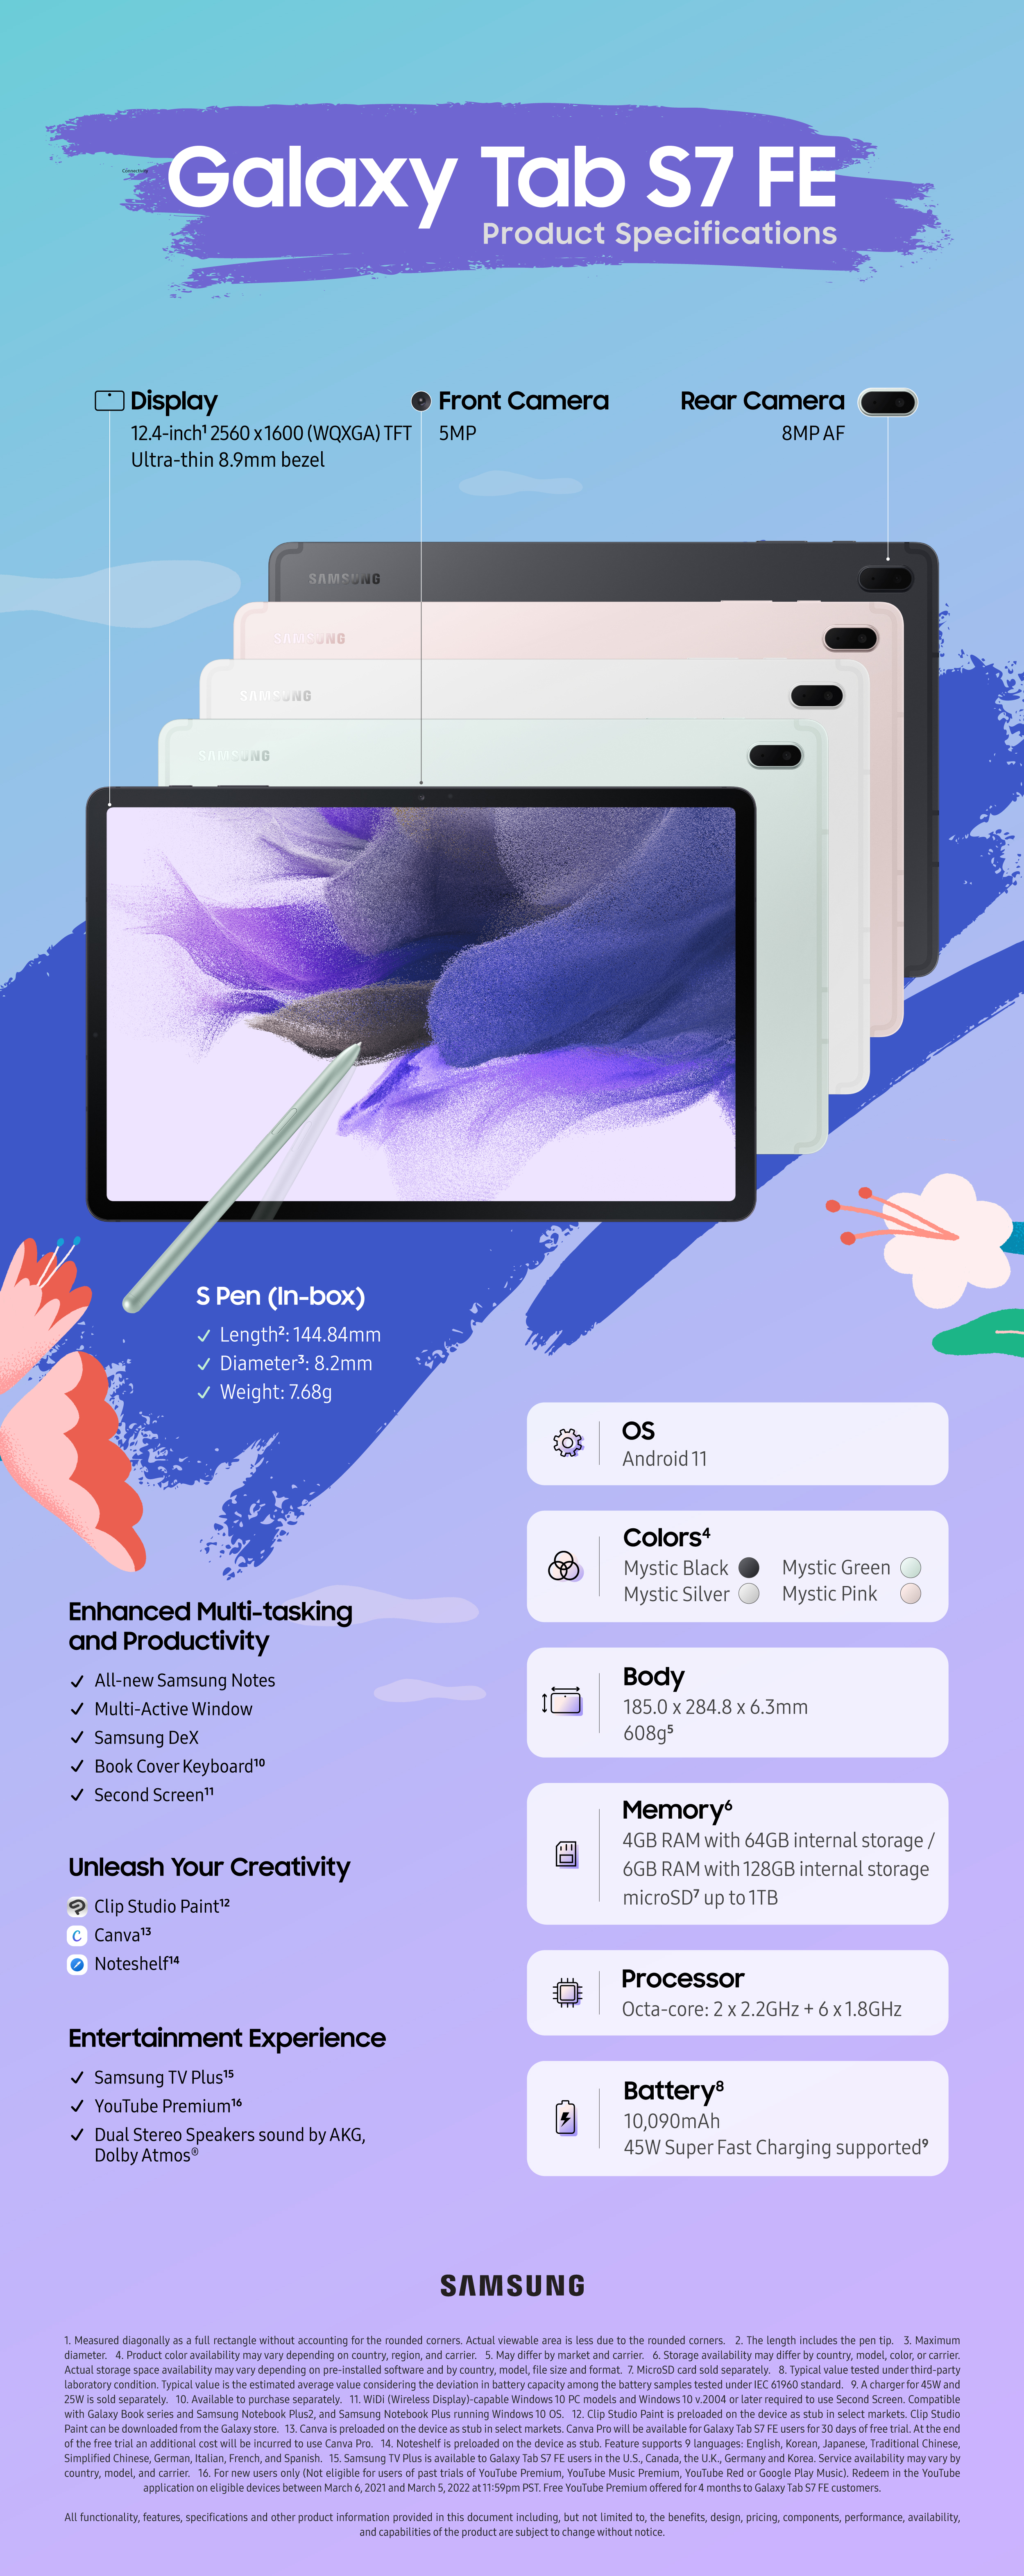 Samsung Galaxy Tab S7 FE Specifications Infographic